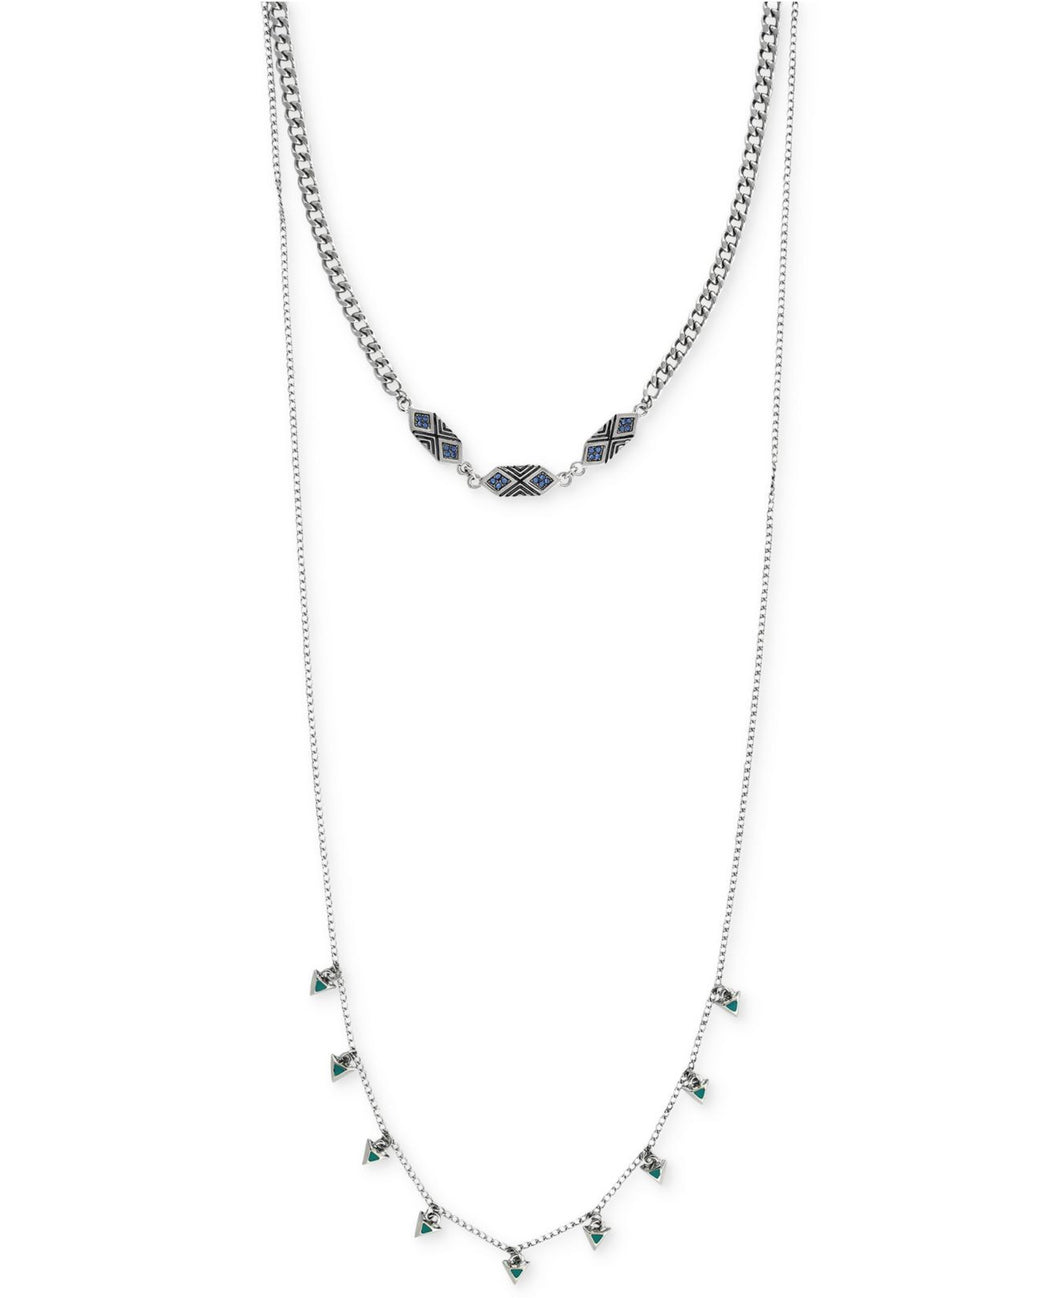 BCBGeneration Women's Metallic Silver-tone Geometric Accent High-low Necklace